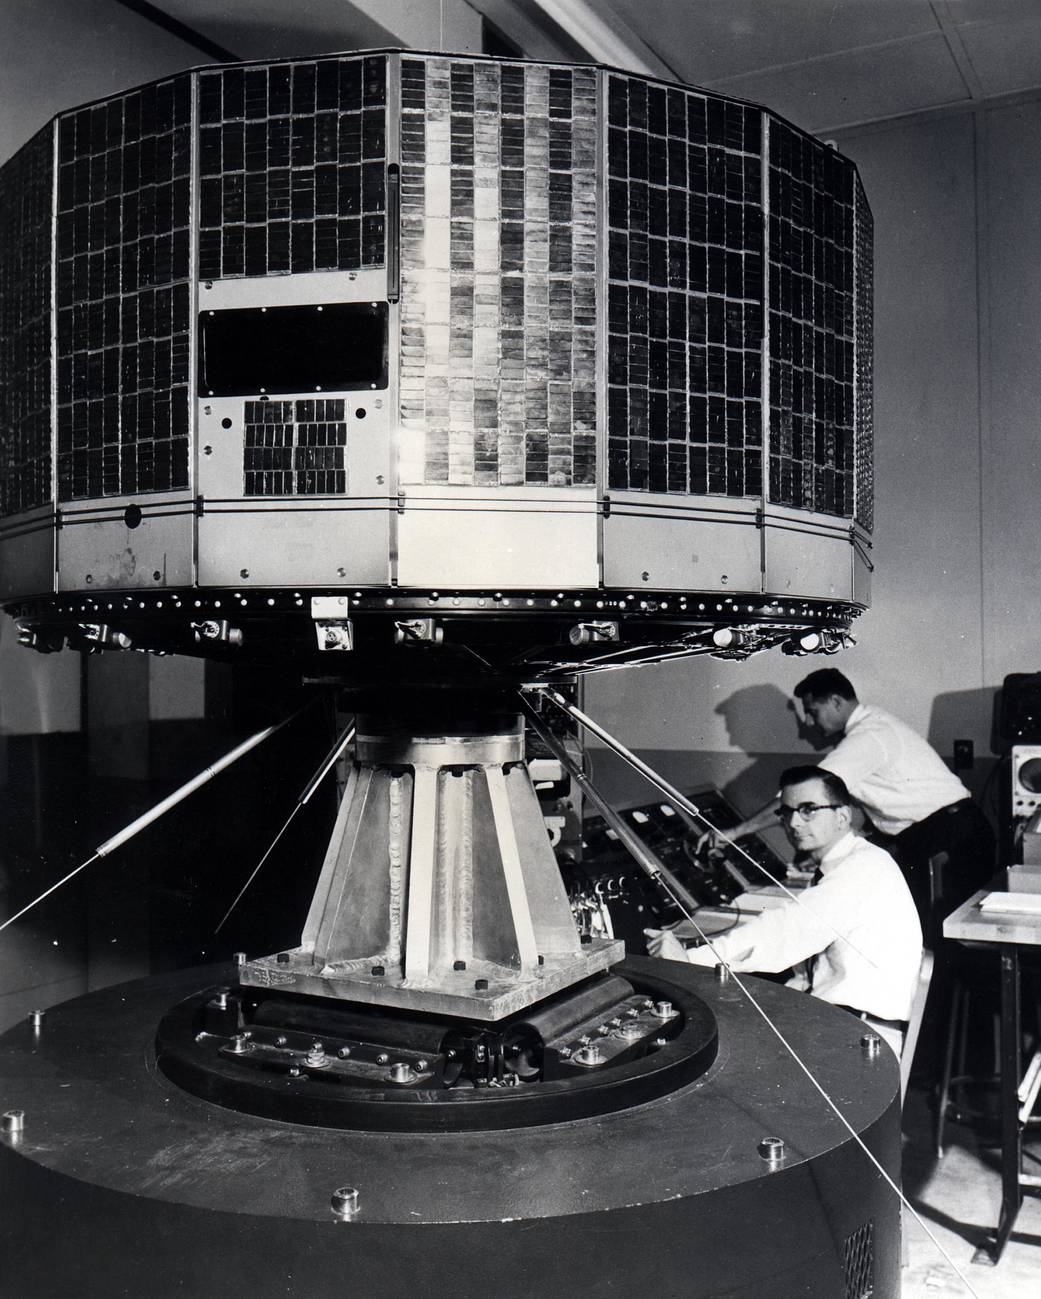 The TIROS-1 satellite, the first U.S. weather satellite, undergoes vibration testing at the at the Astro-Electronic Products Division of RCA in Princeton, New Jersey. It launched into orbit on April 1, 1960.